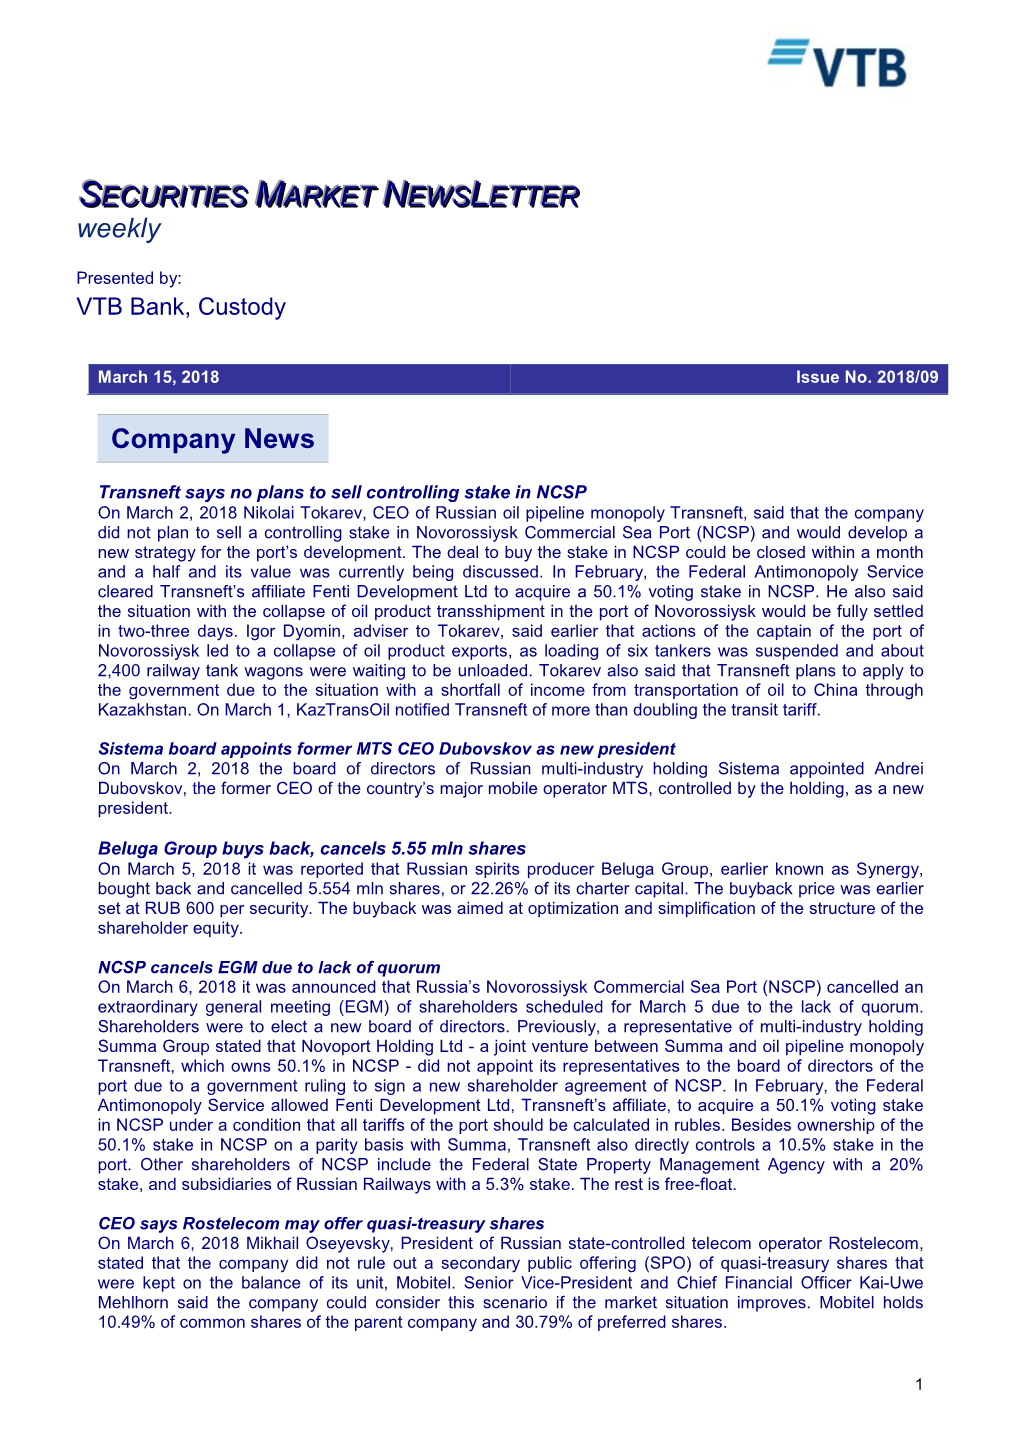 Company News SECURITIES MARKET NEWS LETTER Weekly